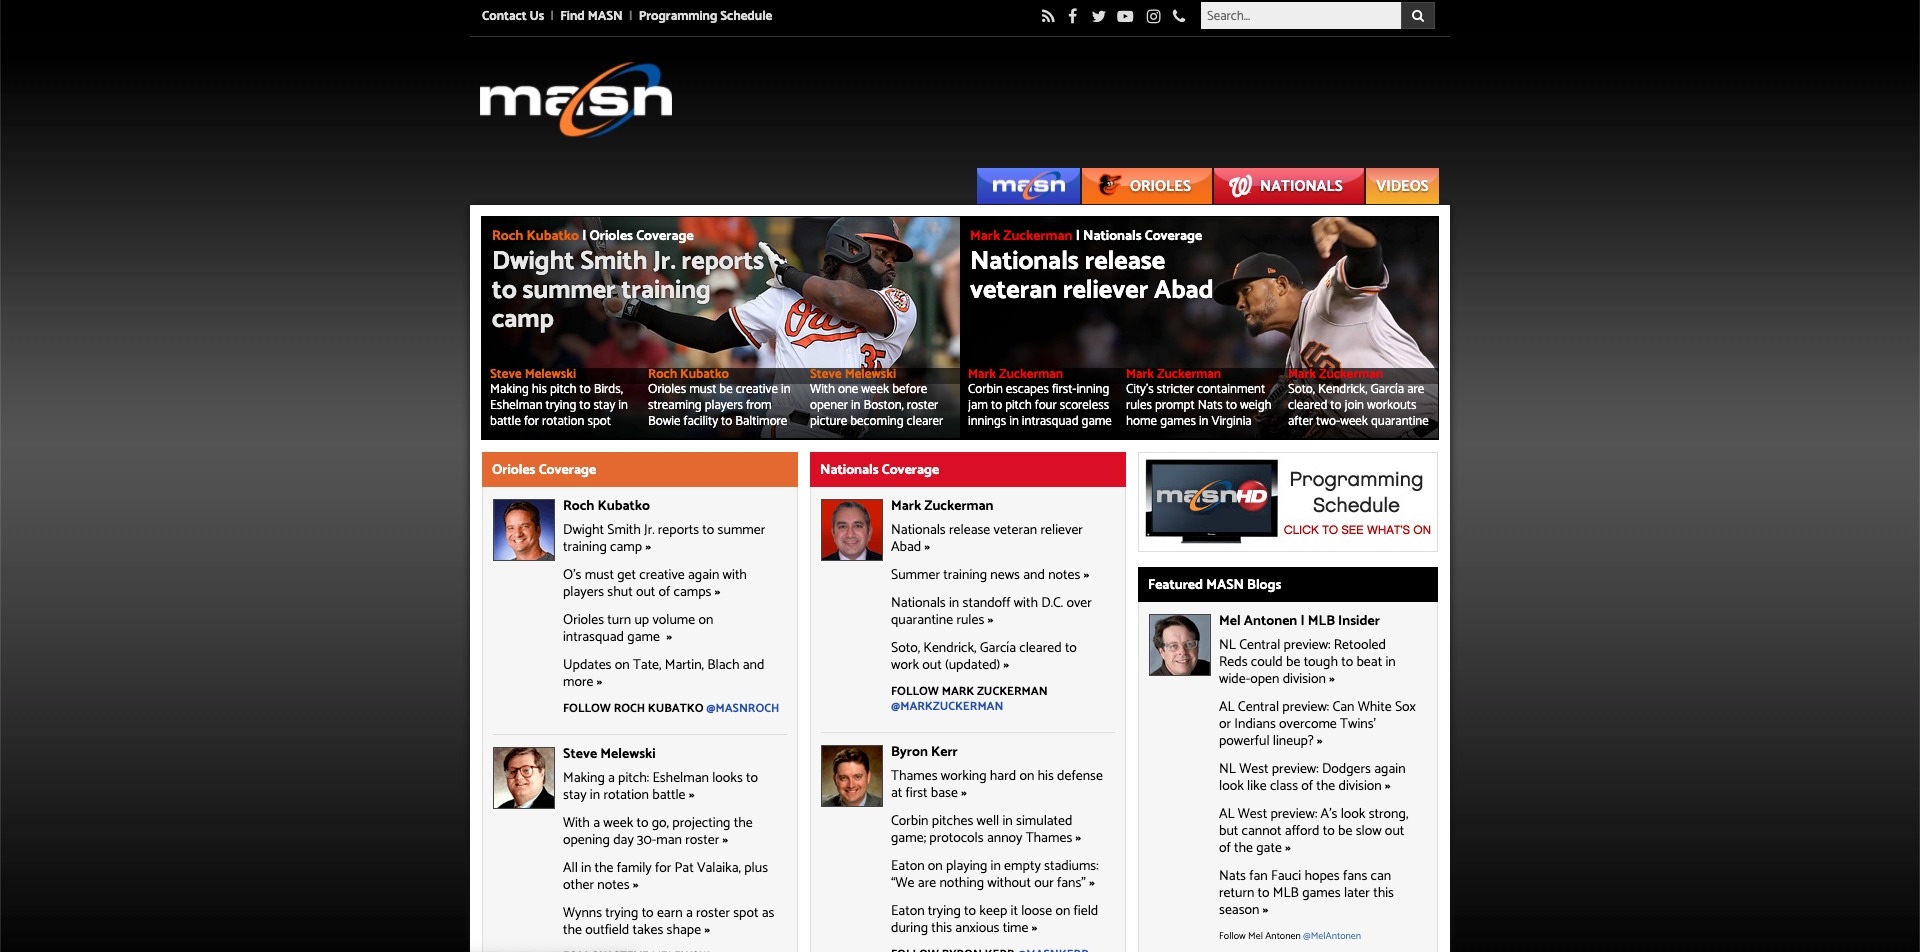 How To Watch Masn Without Cable